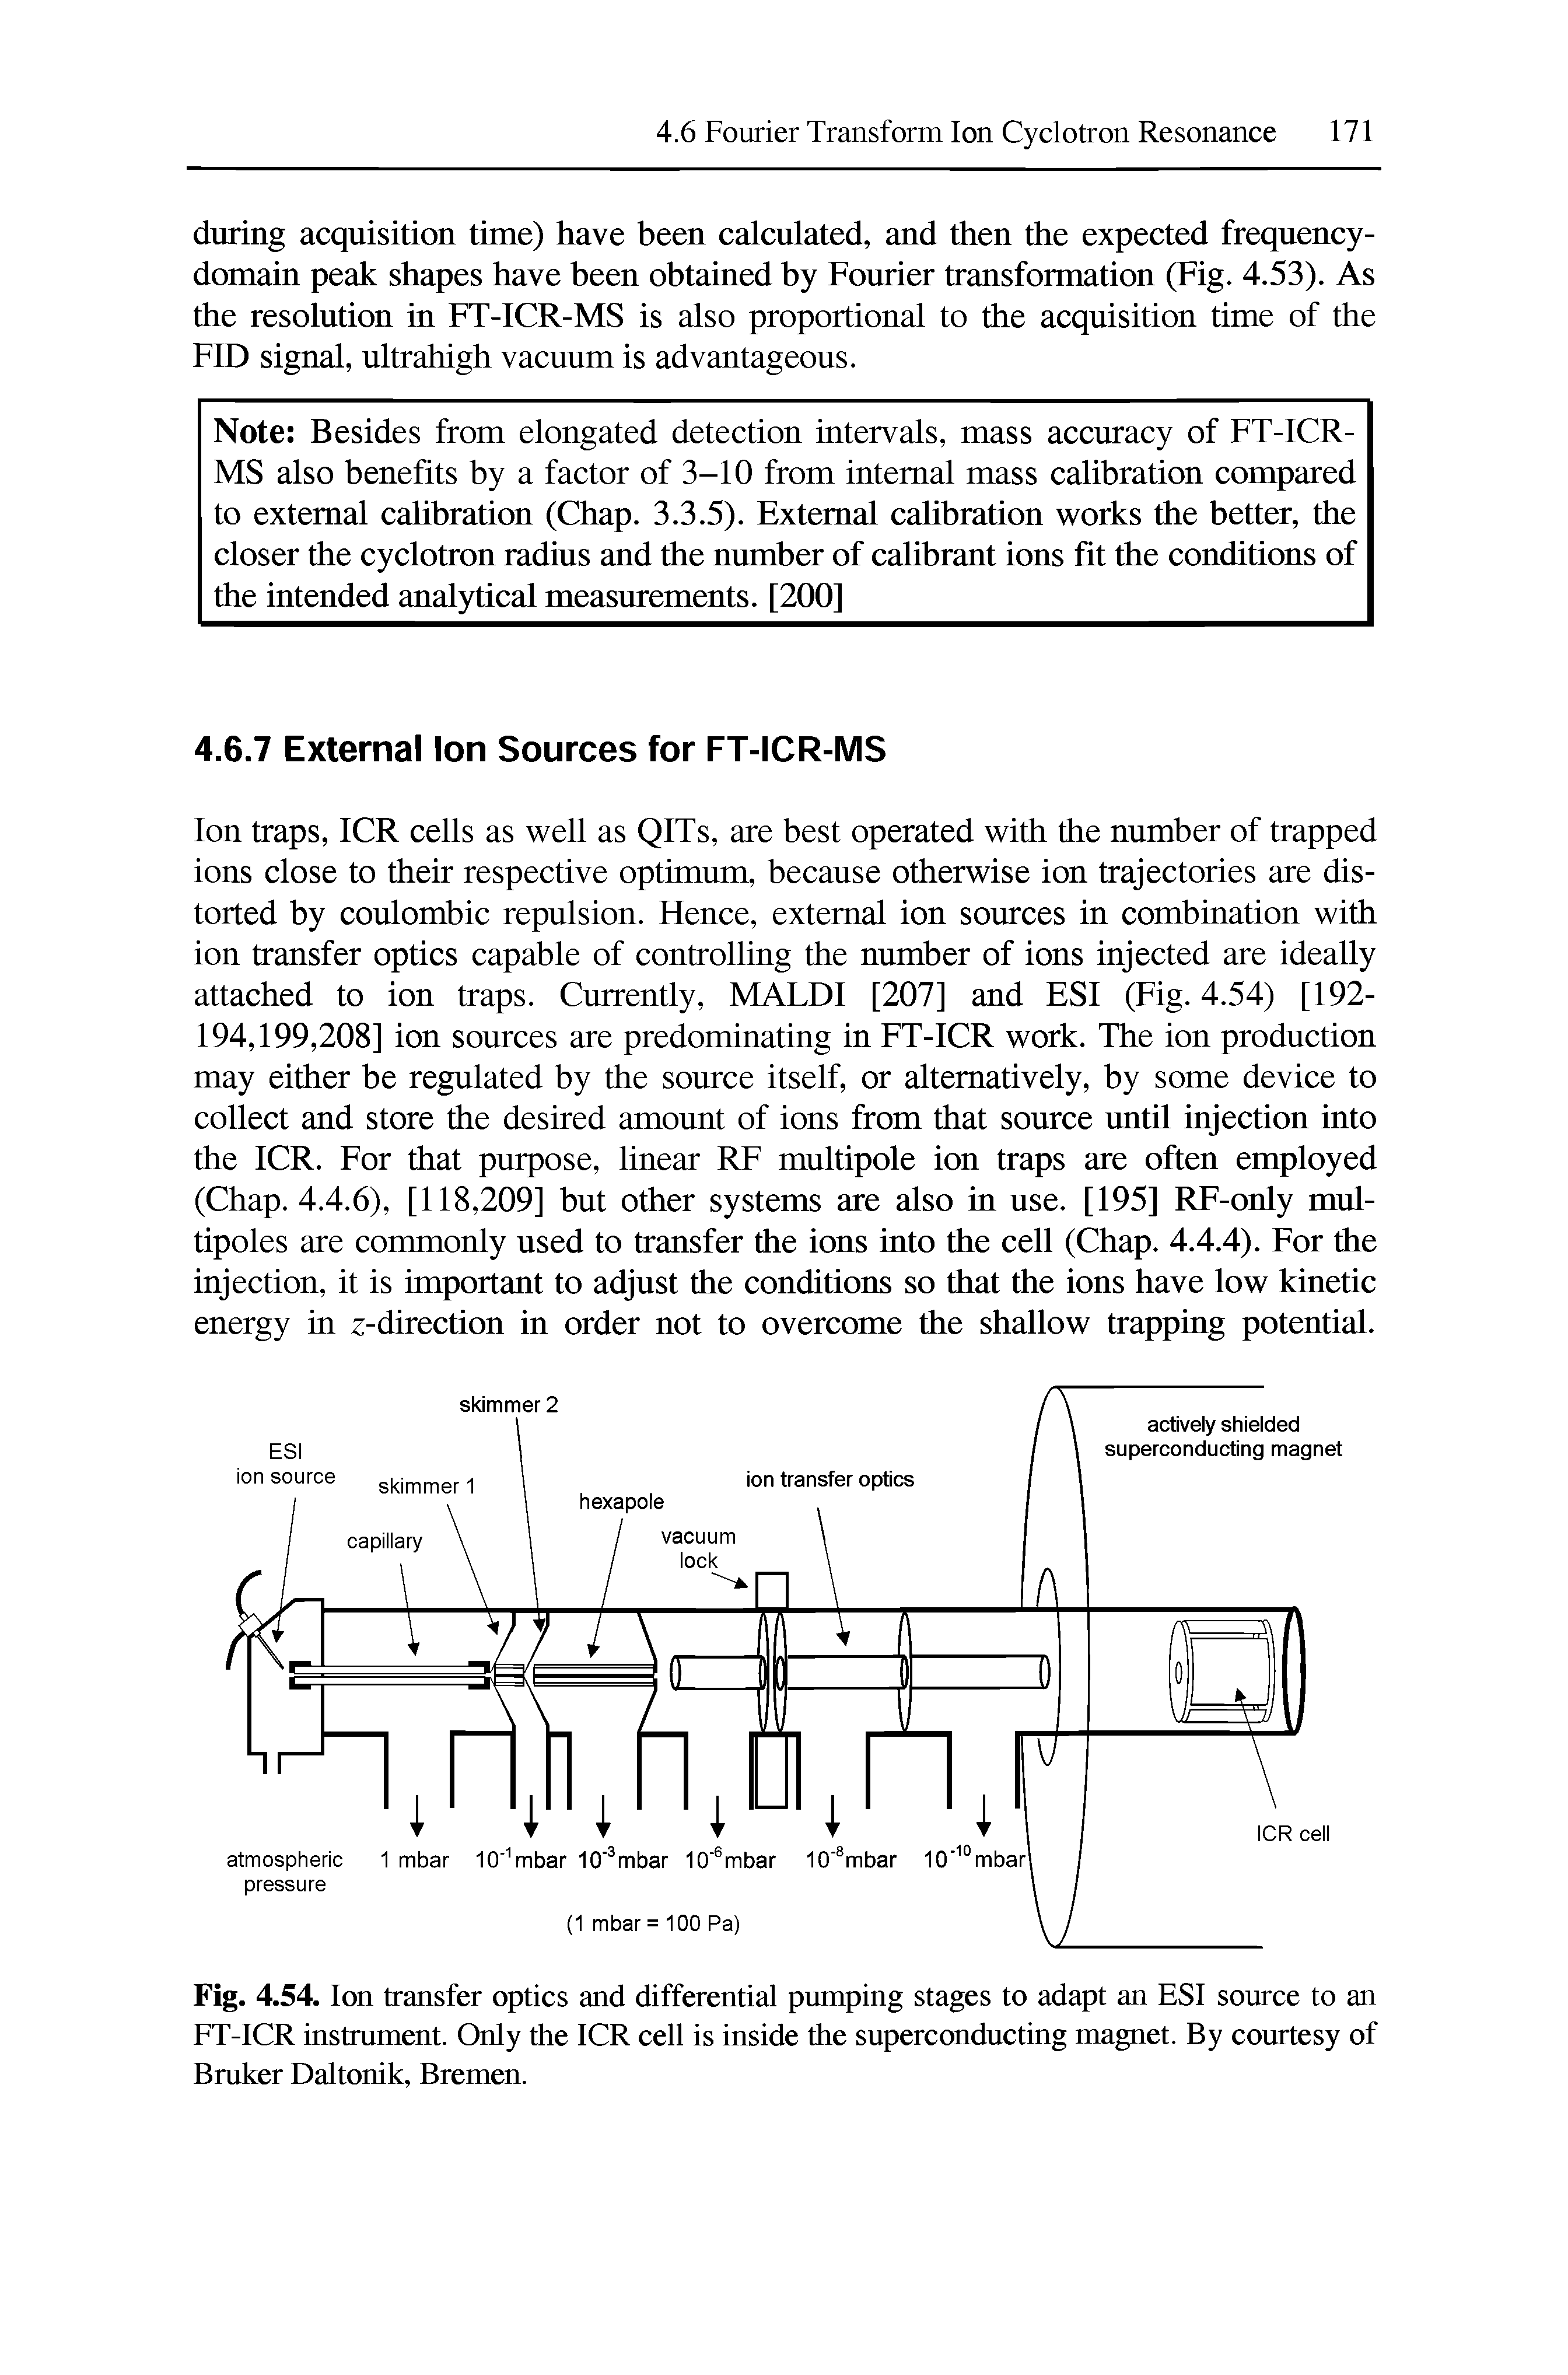 Fig. 4.54. Ion transfer optics and differential pumping stages to adapt an ESI source to an FT-ICR instrument. Only the ICR cell is inside the superconducting magnet. By courtesy of Bruker Daltonik, Bremen.